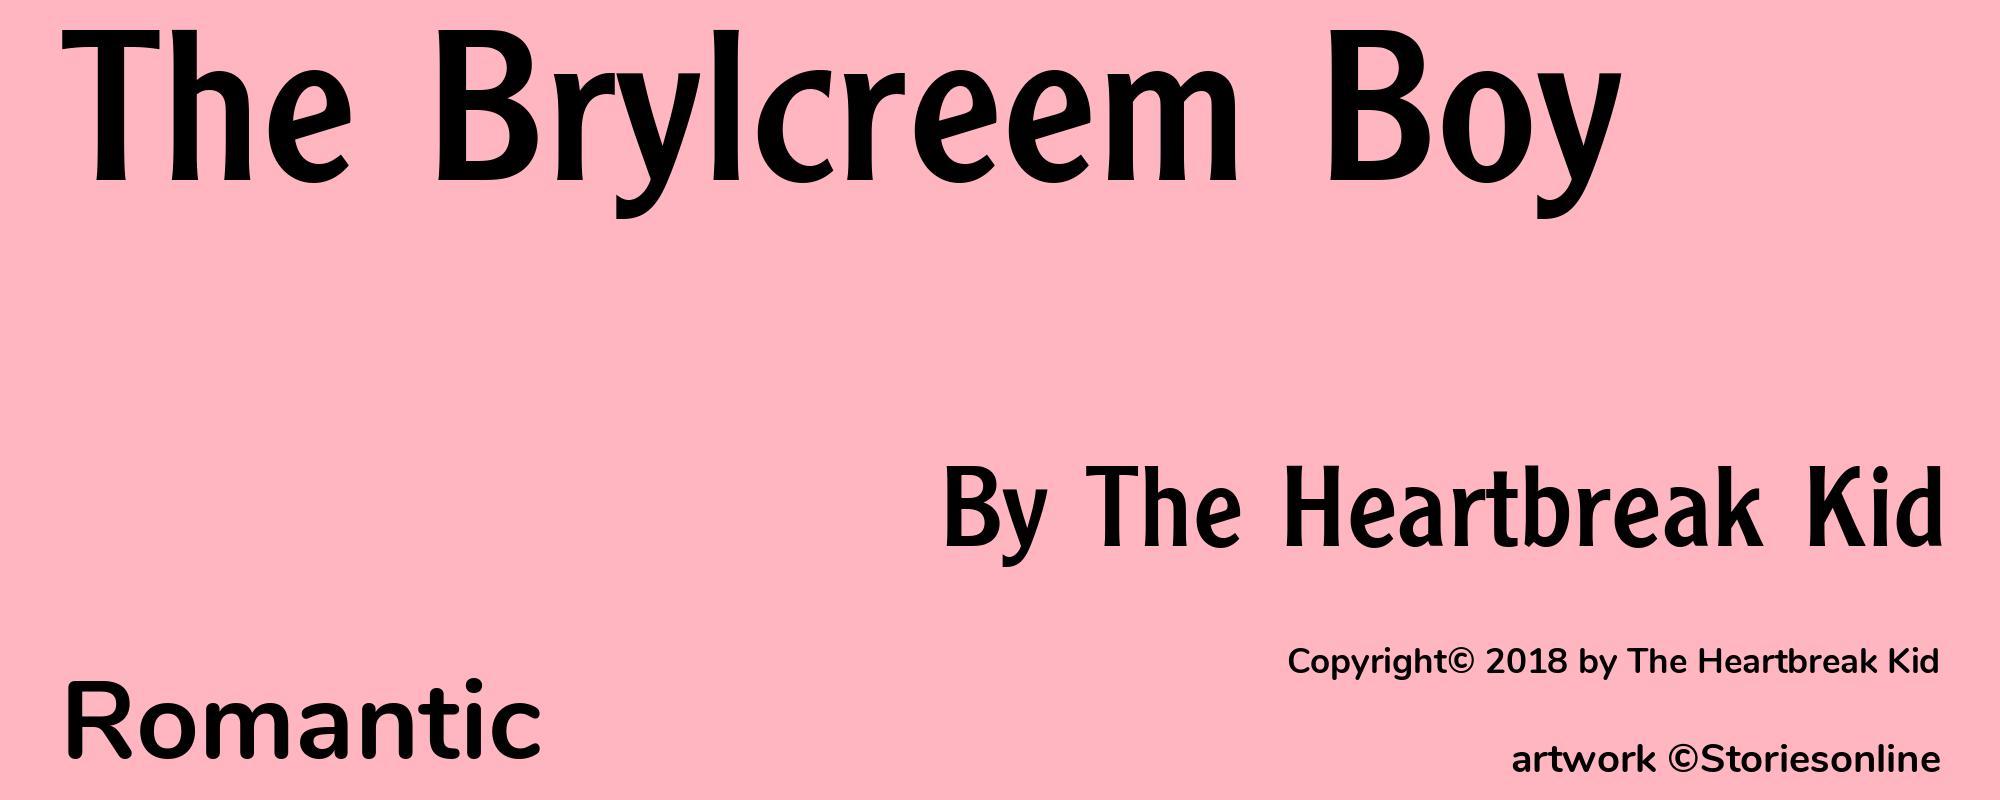 The Brylcreem Boy - Cover